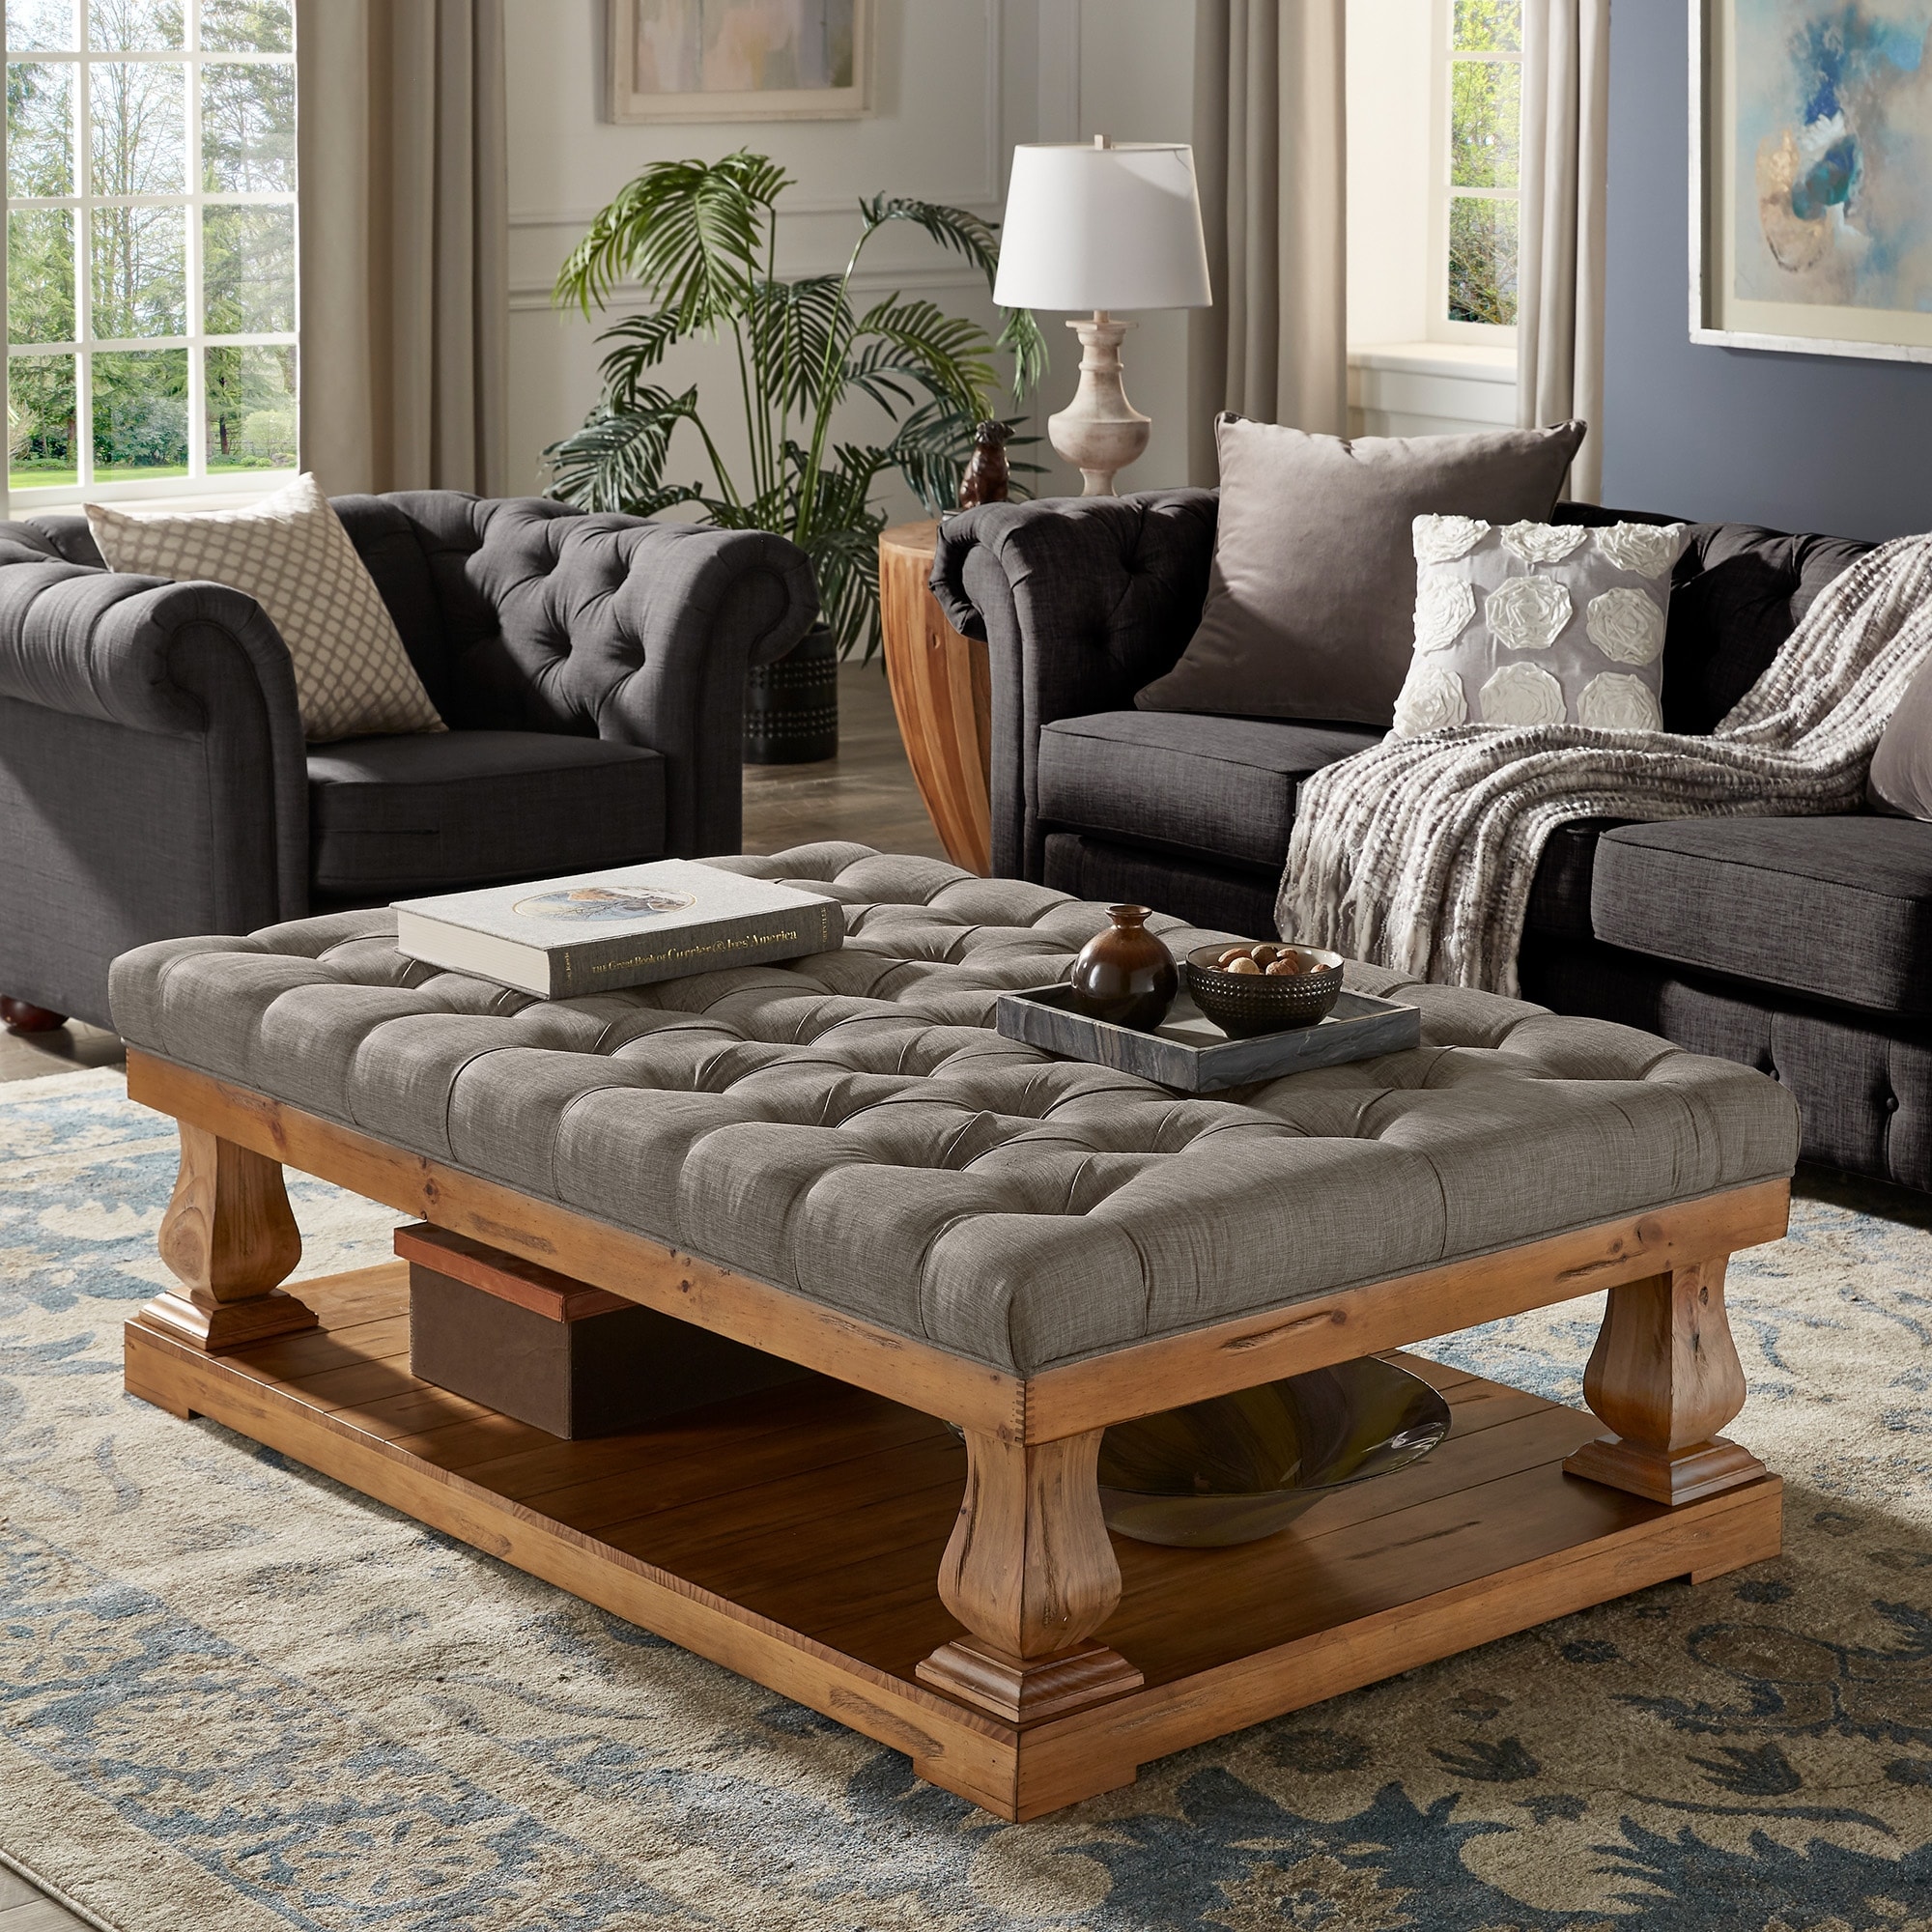 https://ak1.ostkcdn.com/images/products/is/images/direct/a16845460d1a182397dc72bc1585ffea27f75139/Knightsbridge-Linen-Baluster-Coffee-Table-Ottoman-by-iNSPIRE-Q-Artisan.jpg